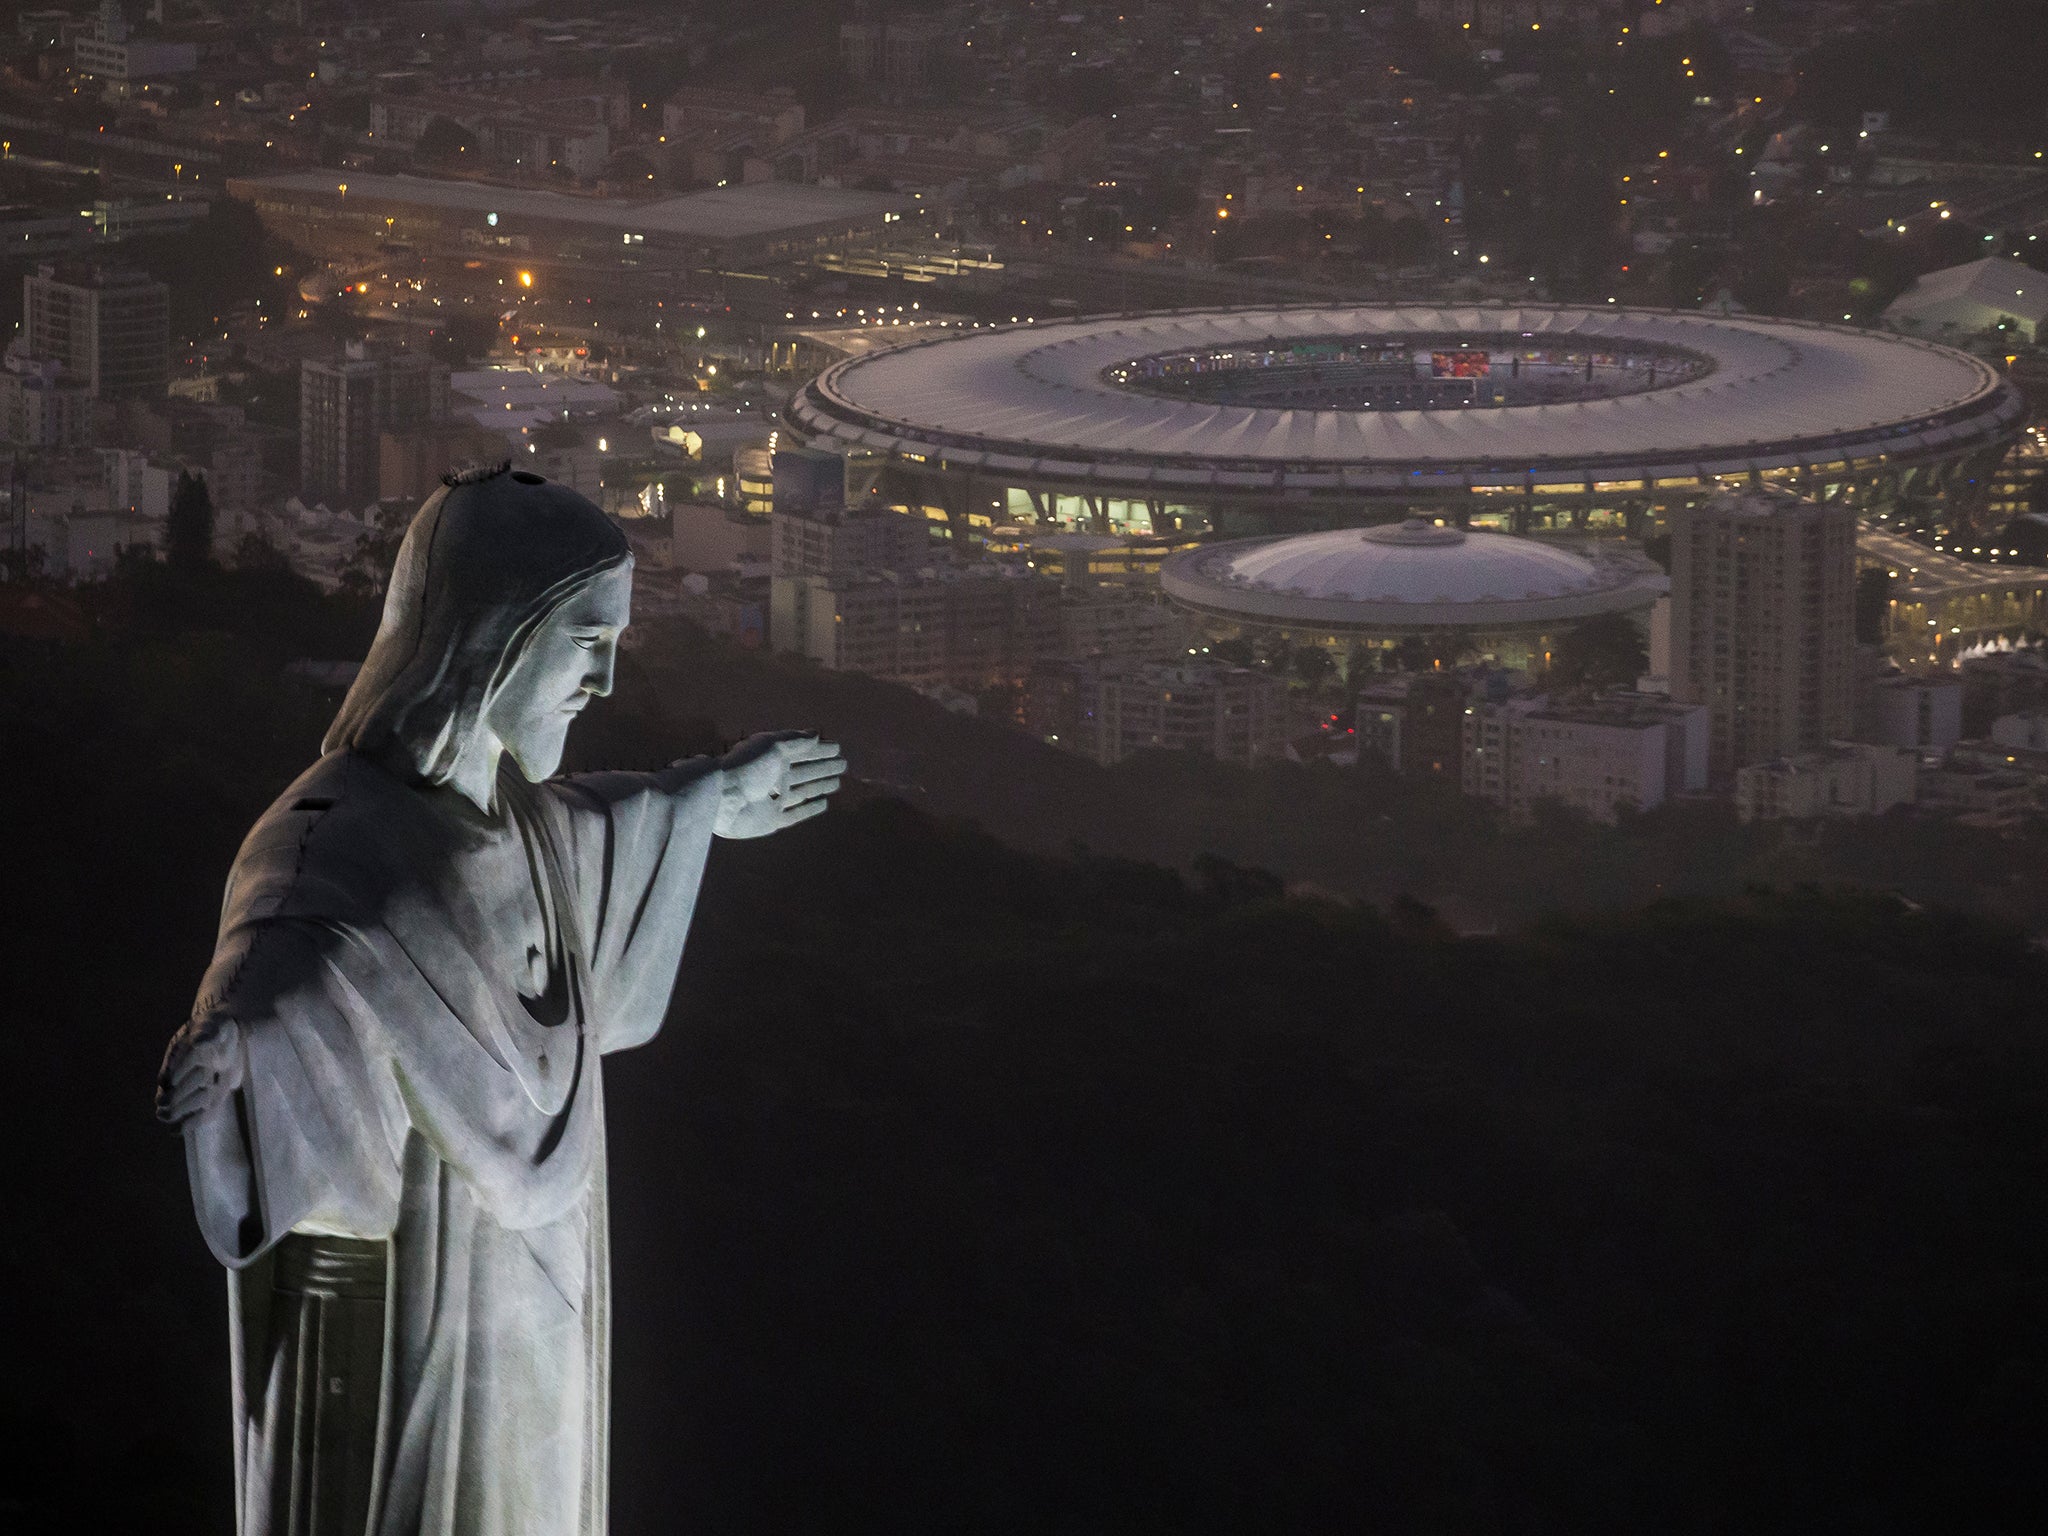 The Games should mean fewer queues at key sites like the Statue of Christ the Redeemer